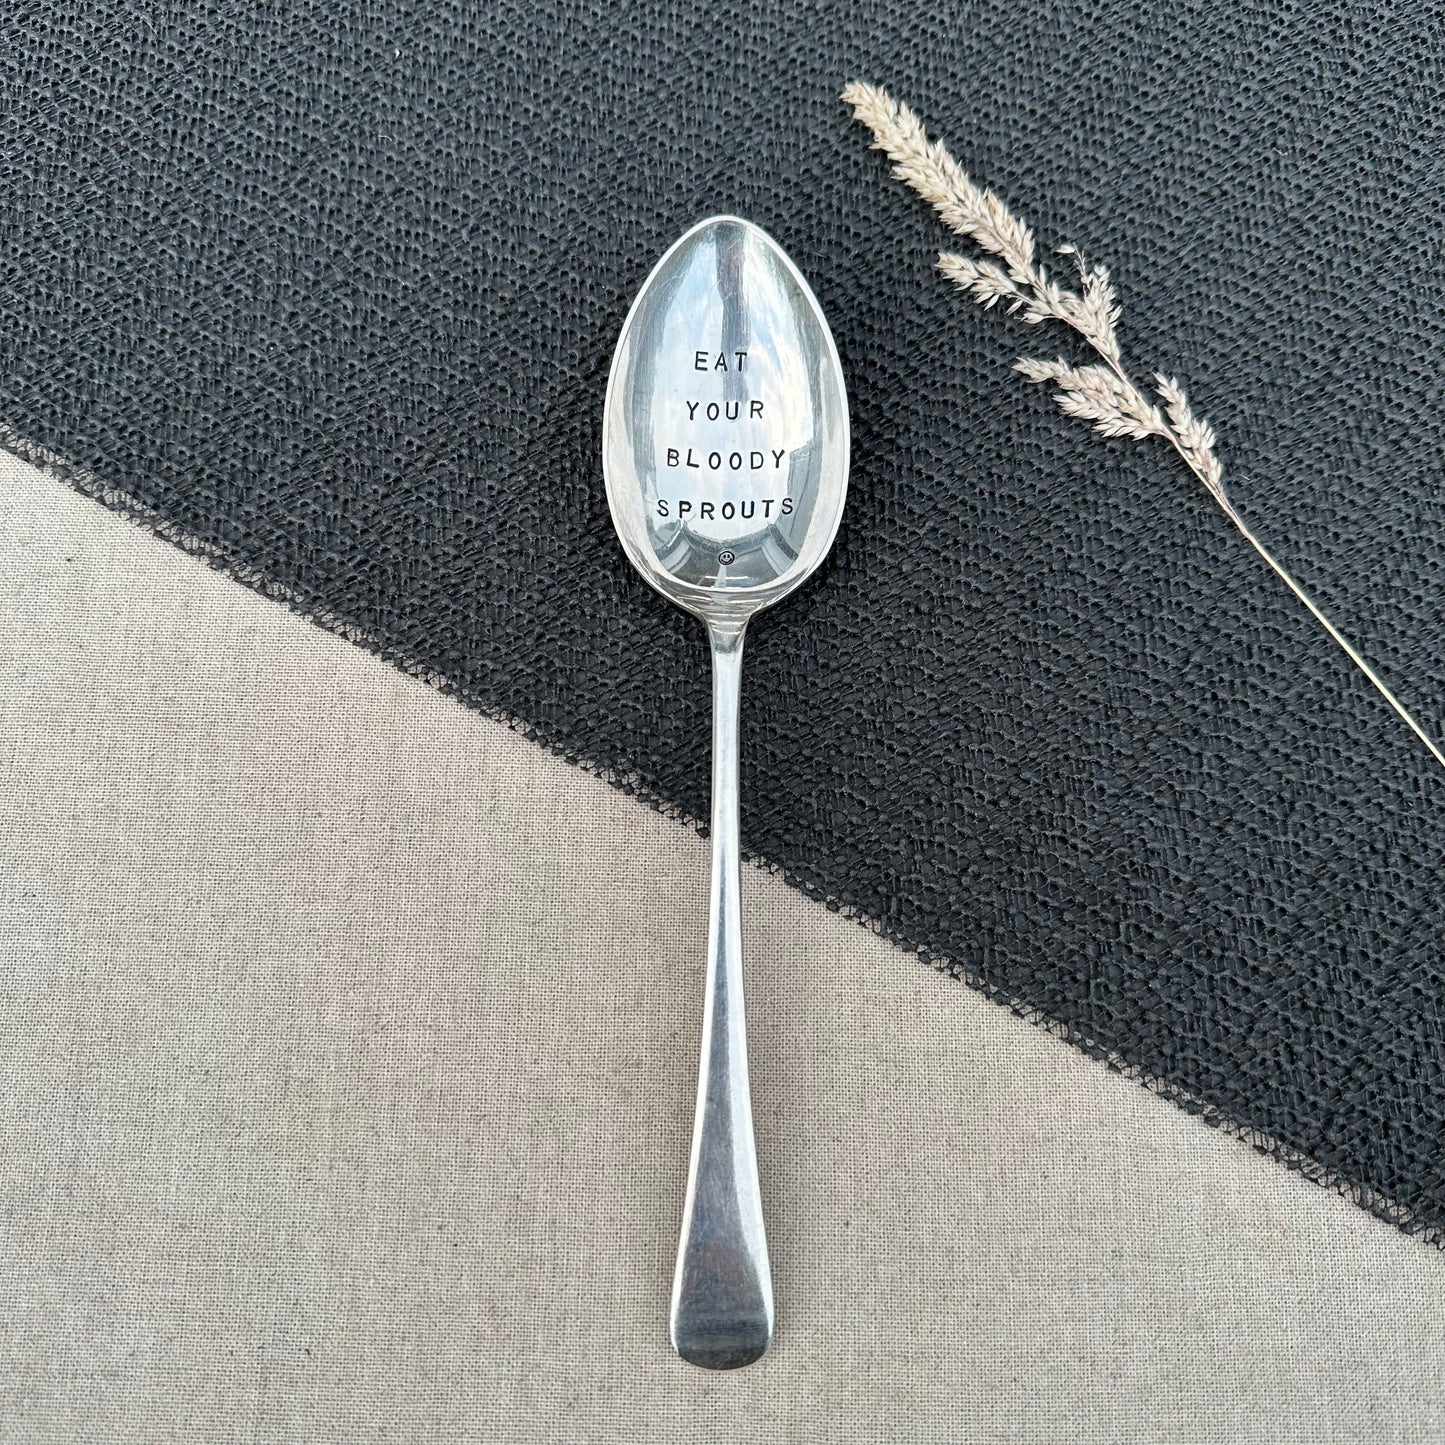 Eat Your Bloody Sprouts - Vintage Serving Spoon